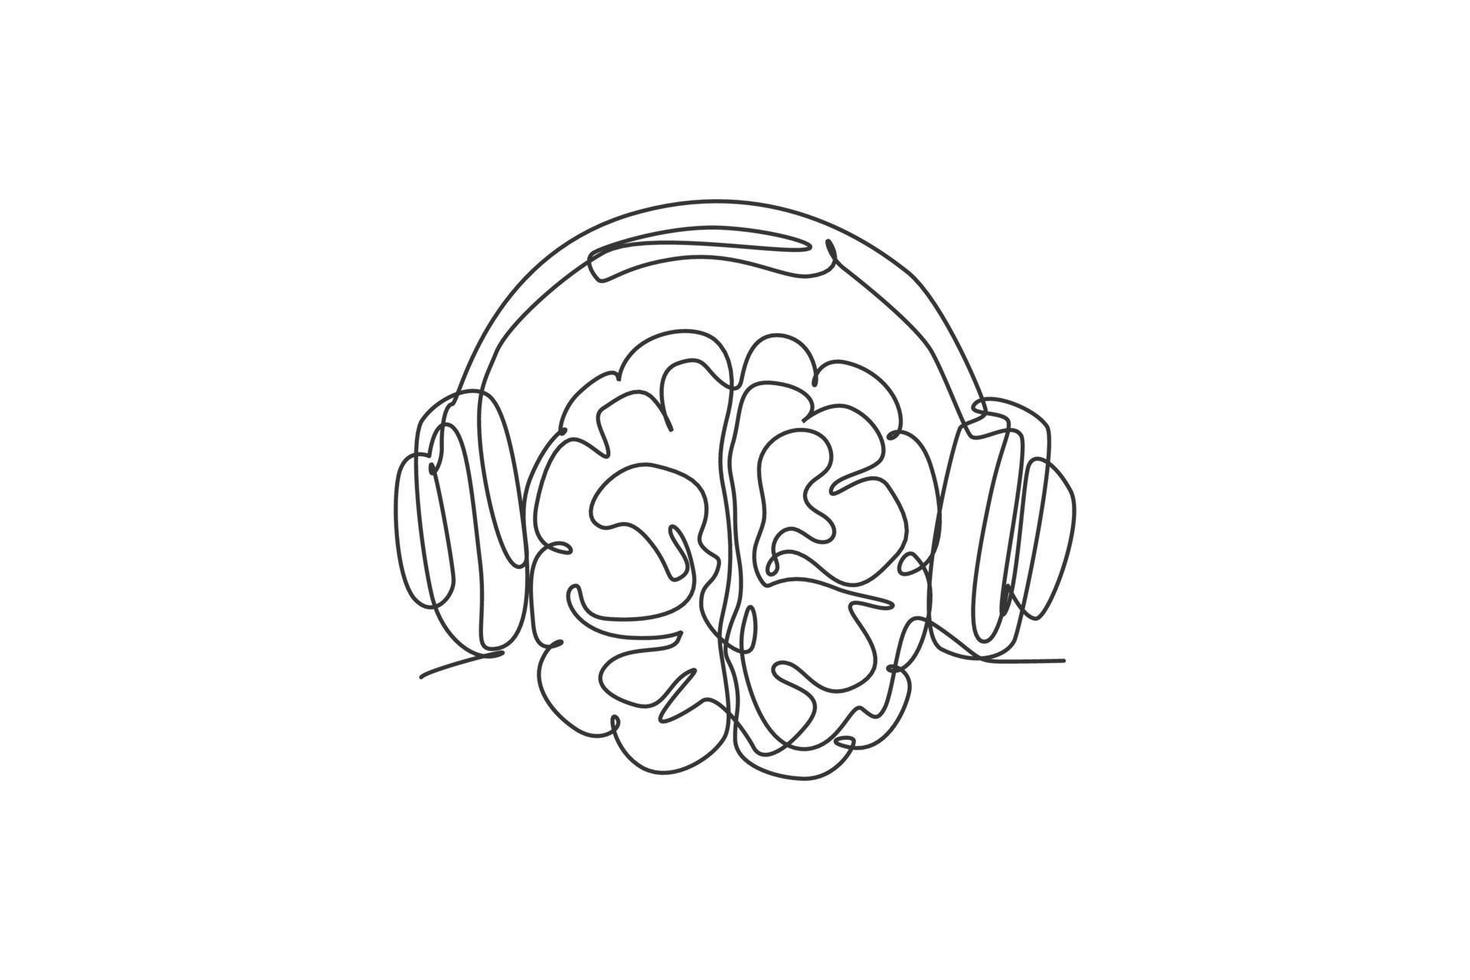 One continuous line drawing of human brain listening to music using wire headphone logo icon. Smart dj logotype symbol template concept. Trendy single line draw graphic design vector illustration